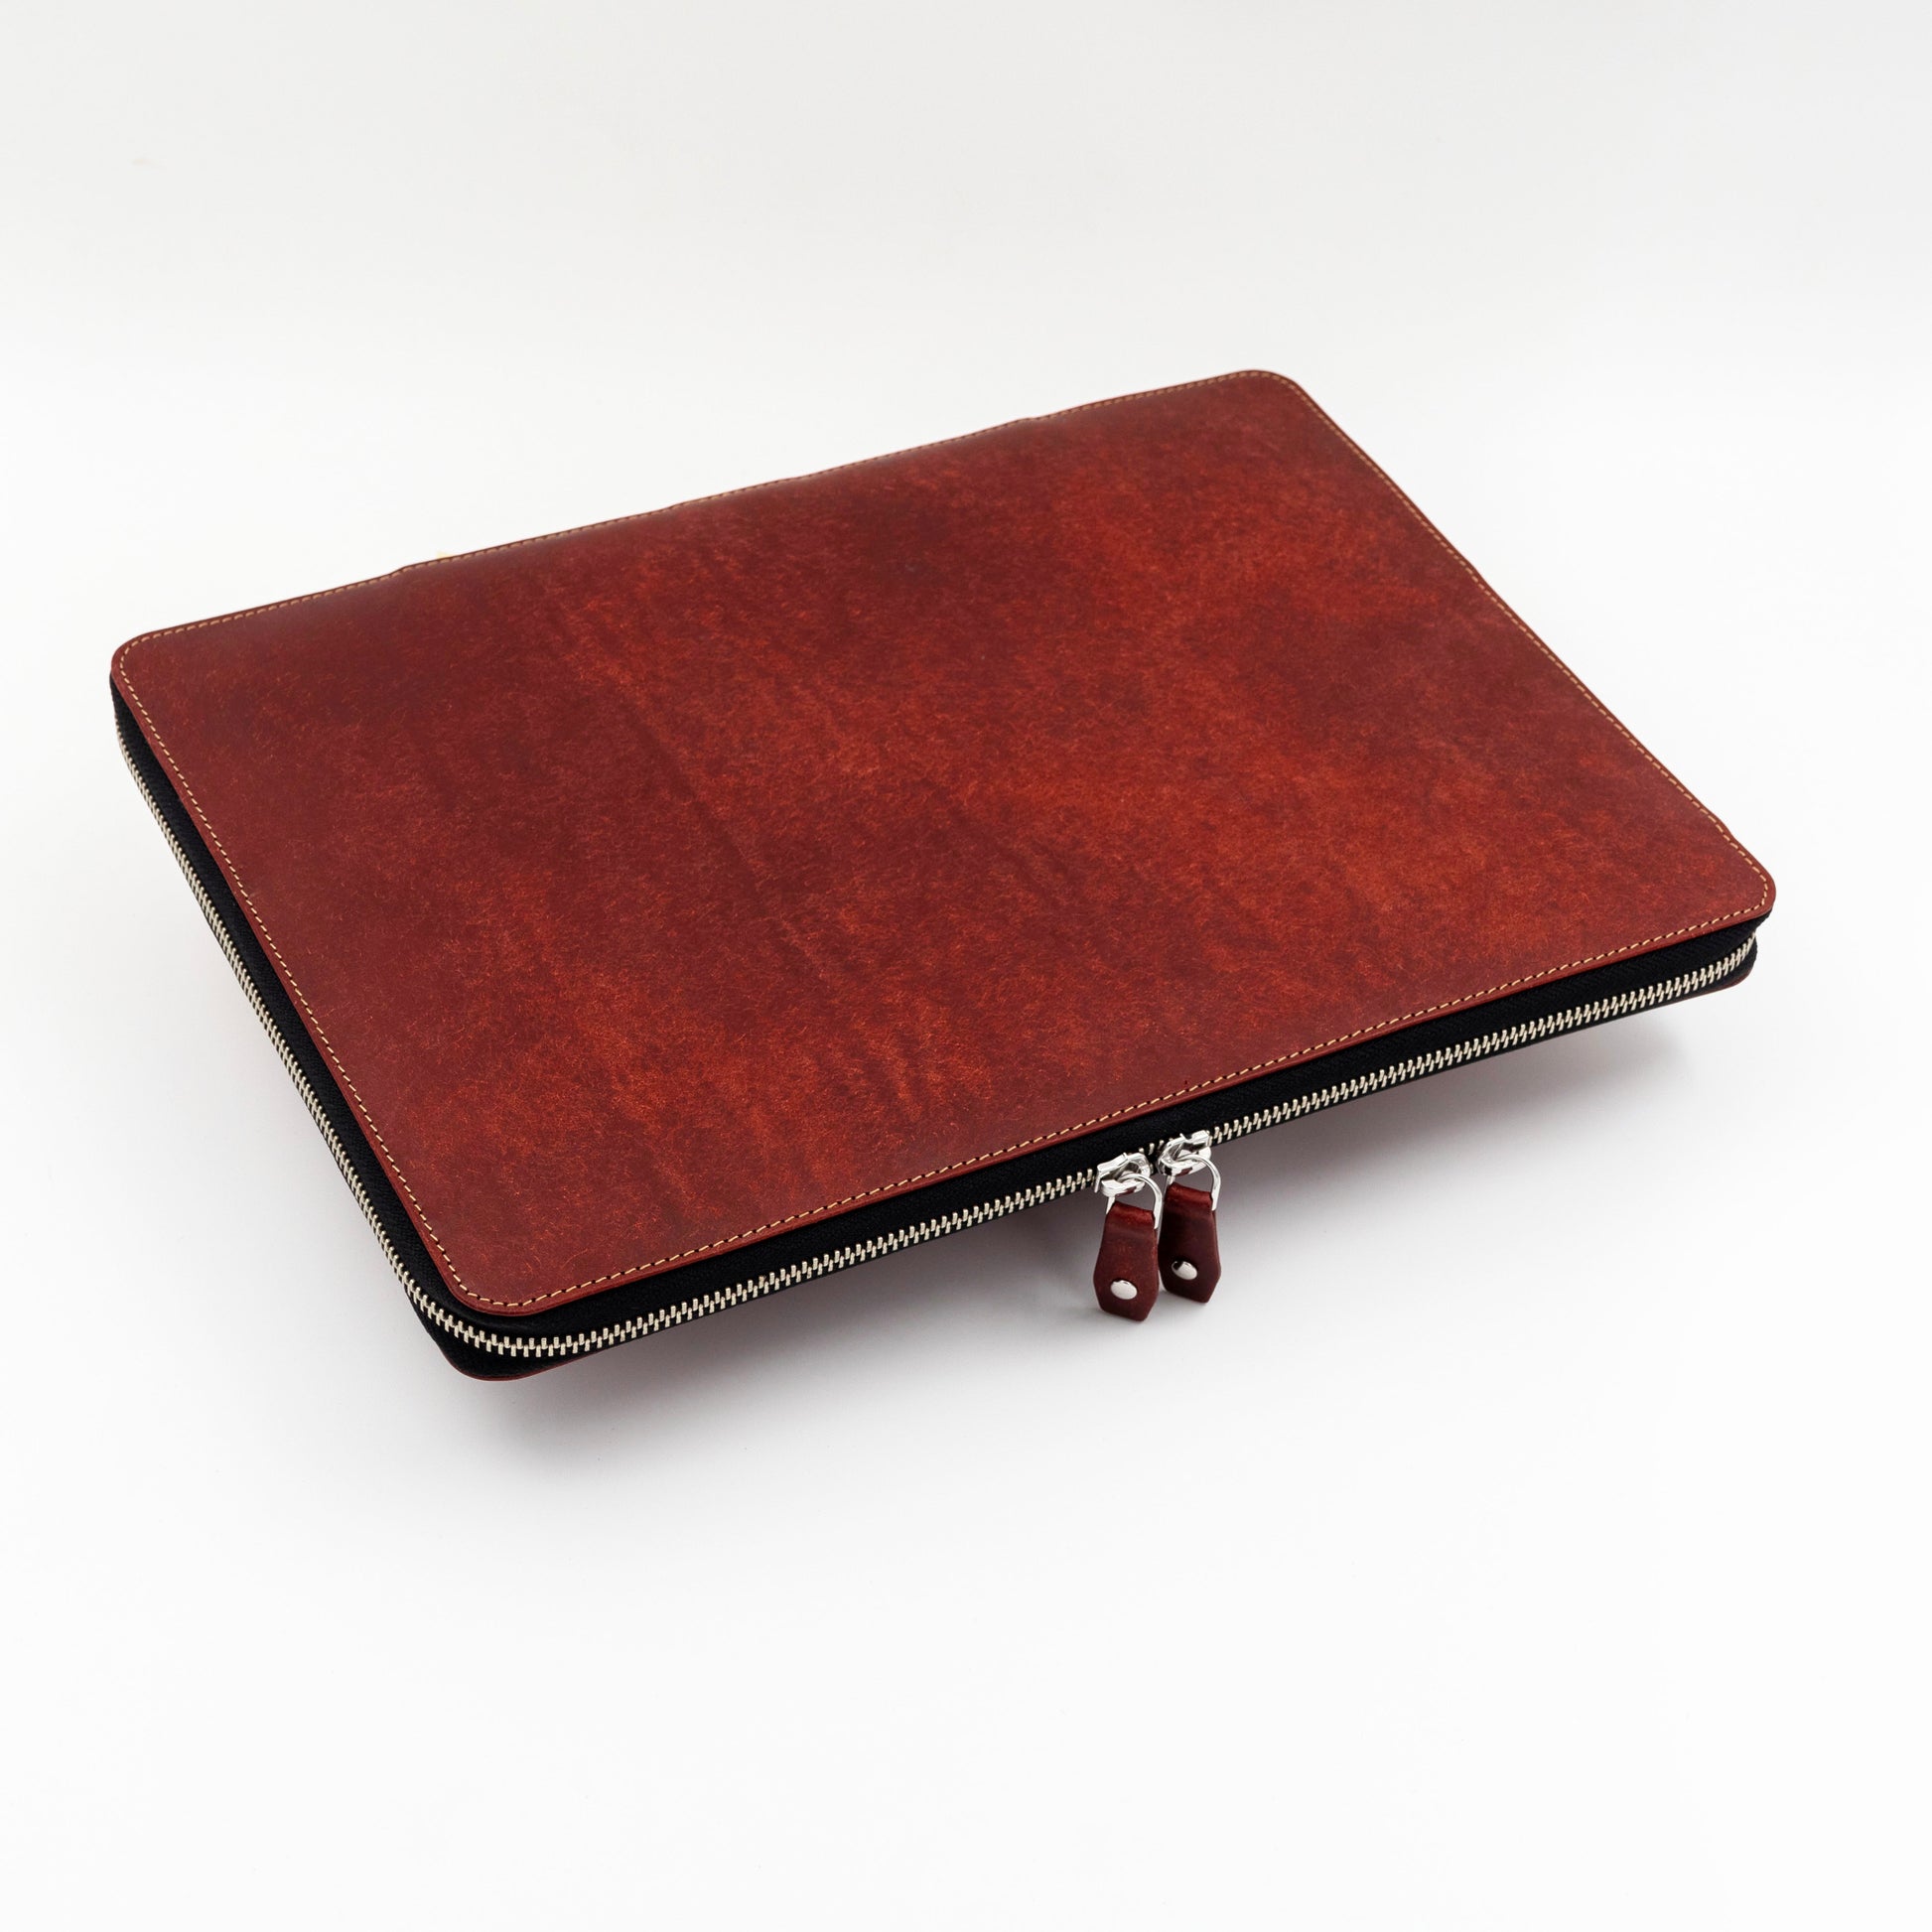 Surface Pro Sleeve Leather, designed with a zip around closure